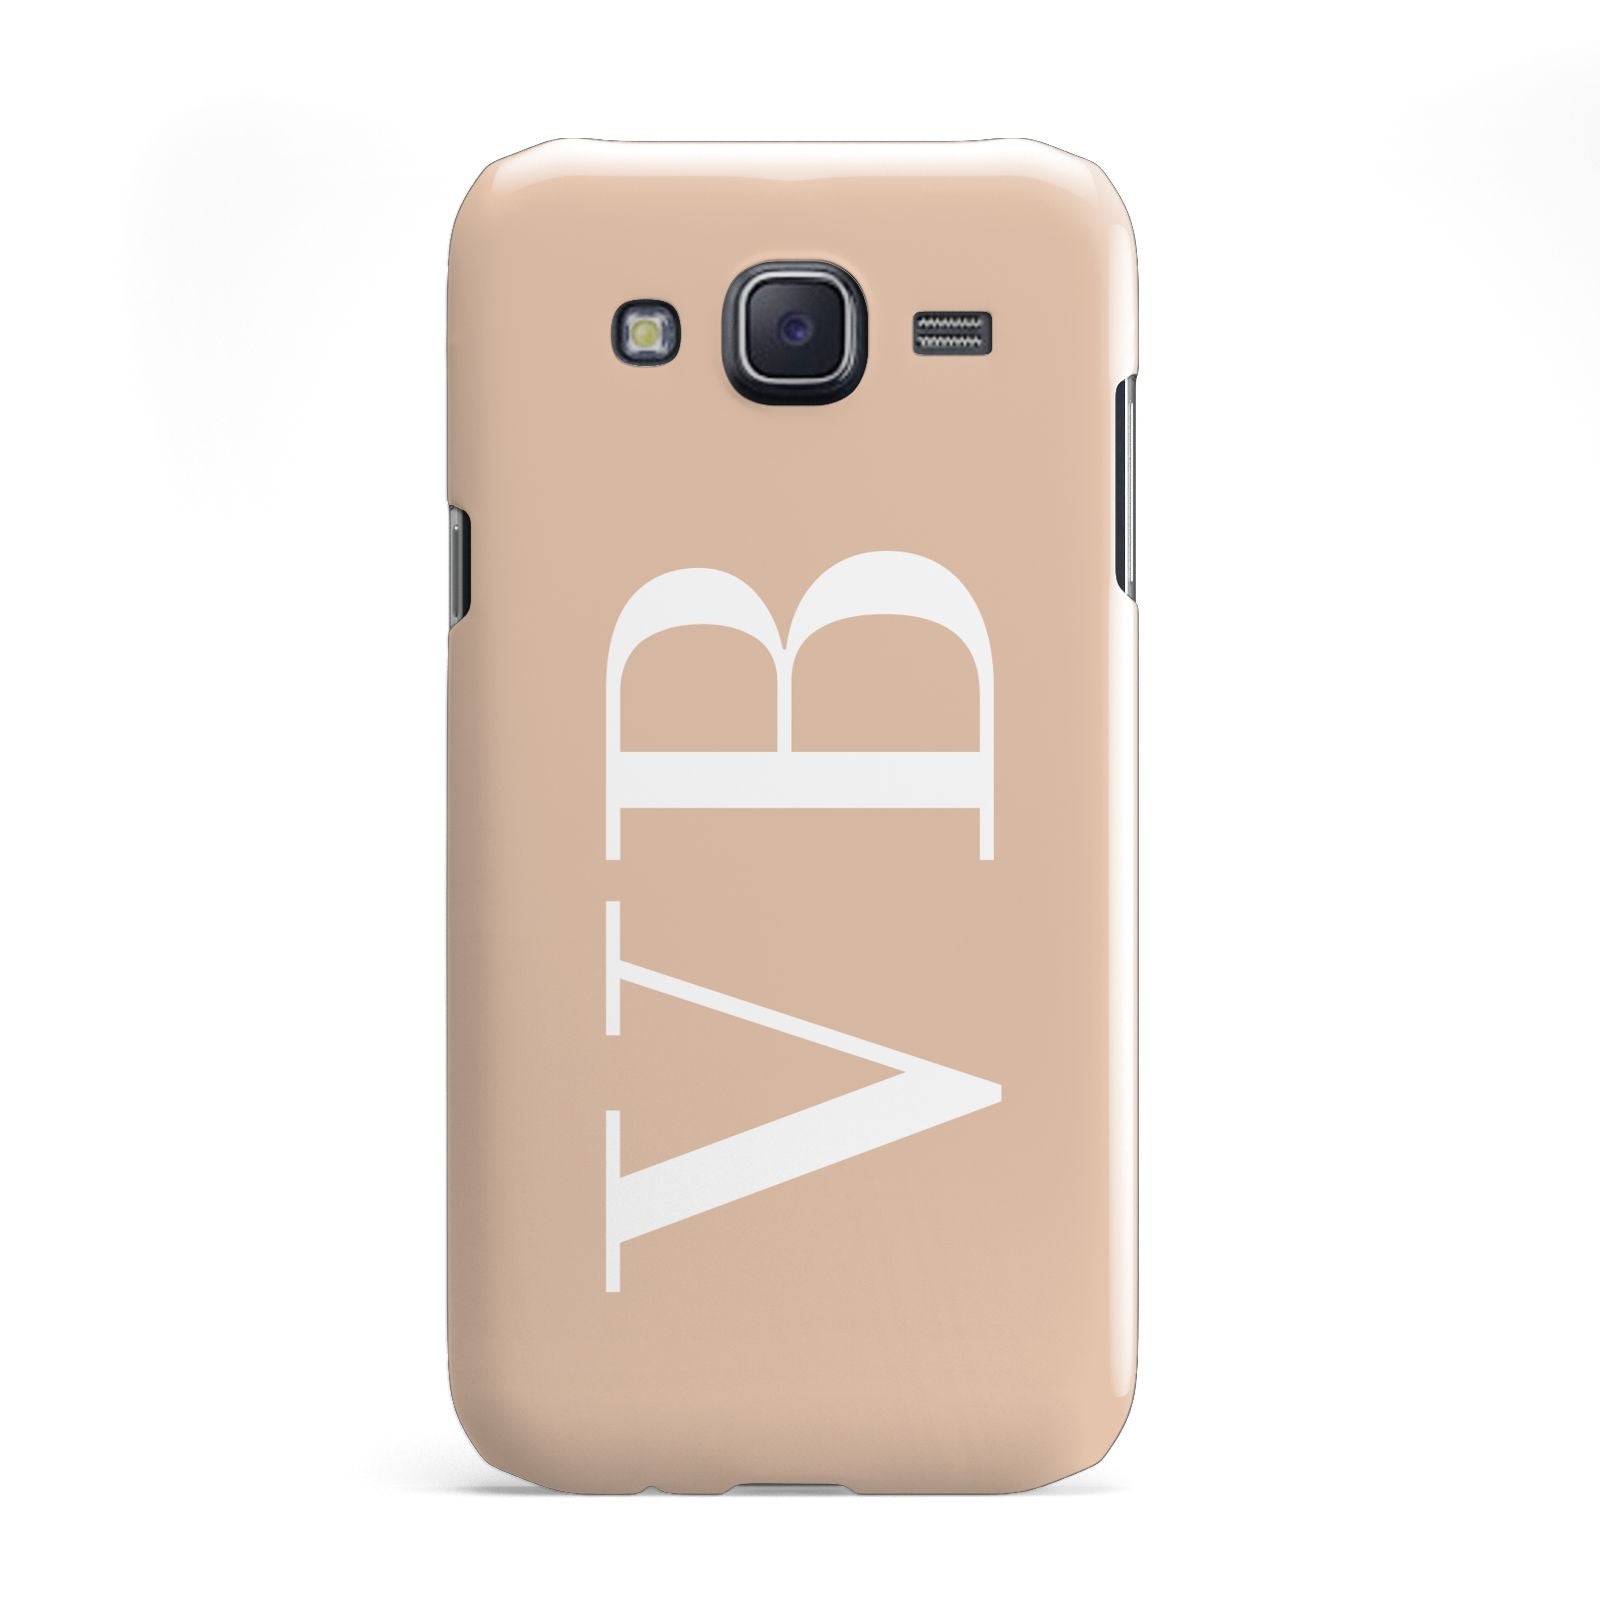 Nude And White Personalised Samsung Galaxy J5 Case